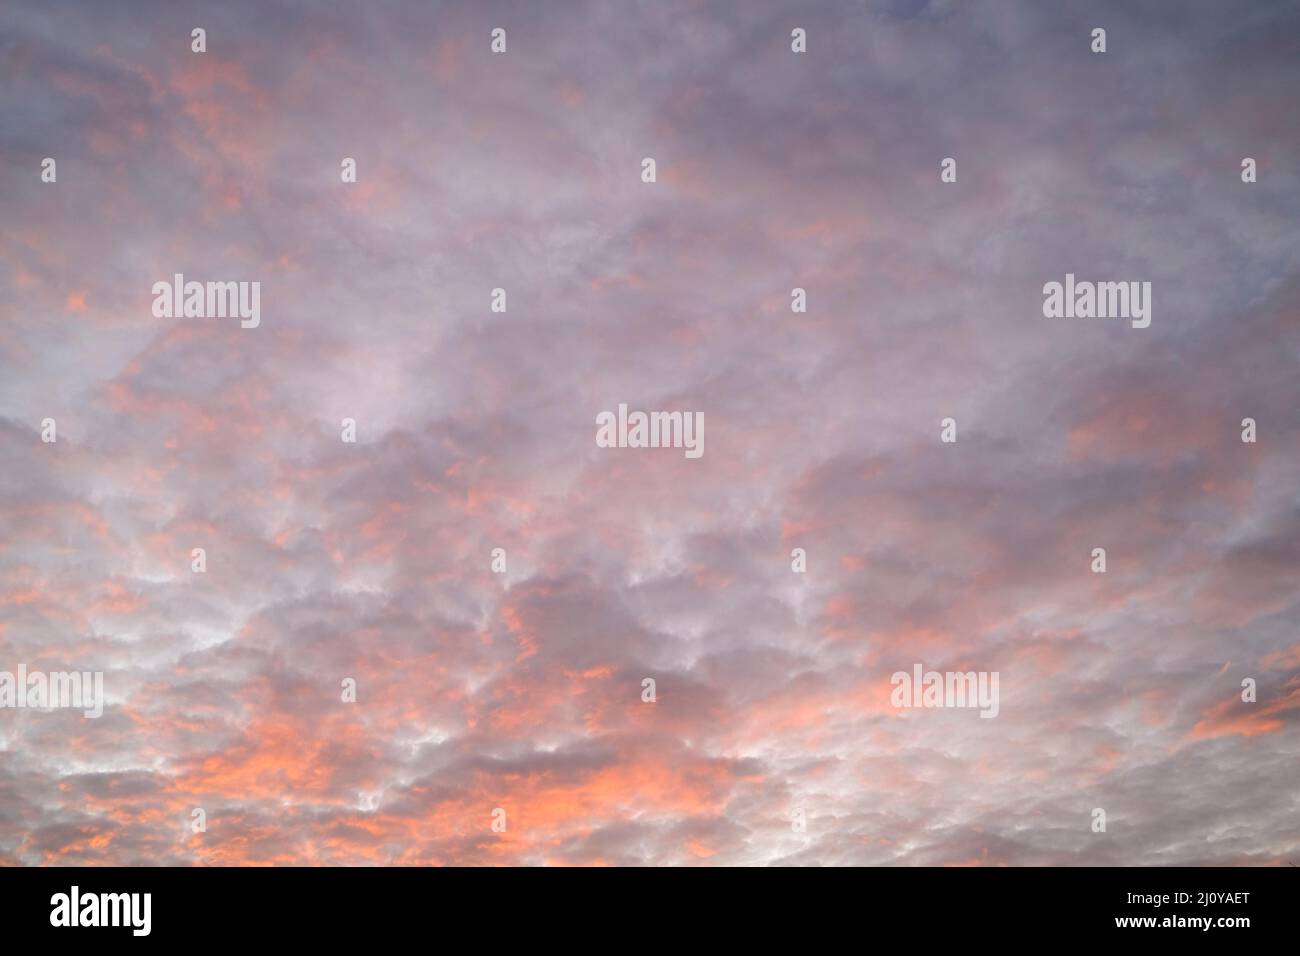 Clouds in sky at sunset Stock Photo